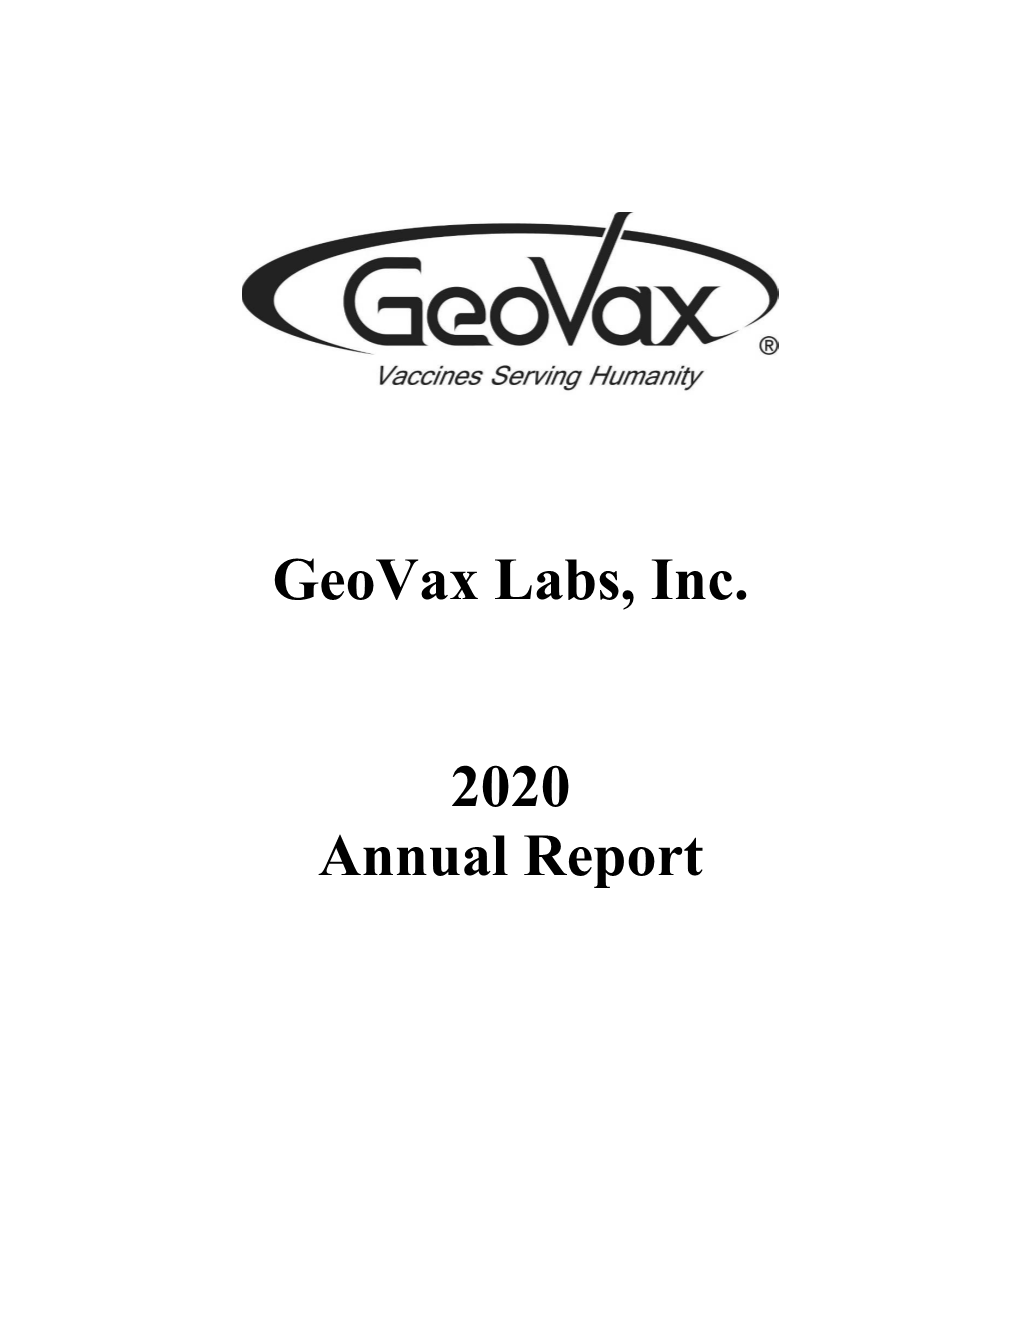 Geovax Labs, Inc. 2020 Annual Report